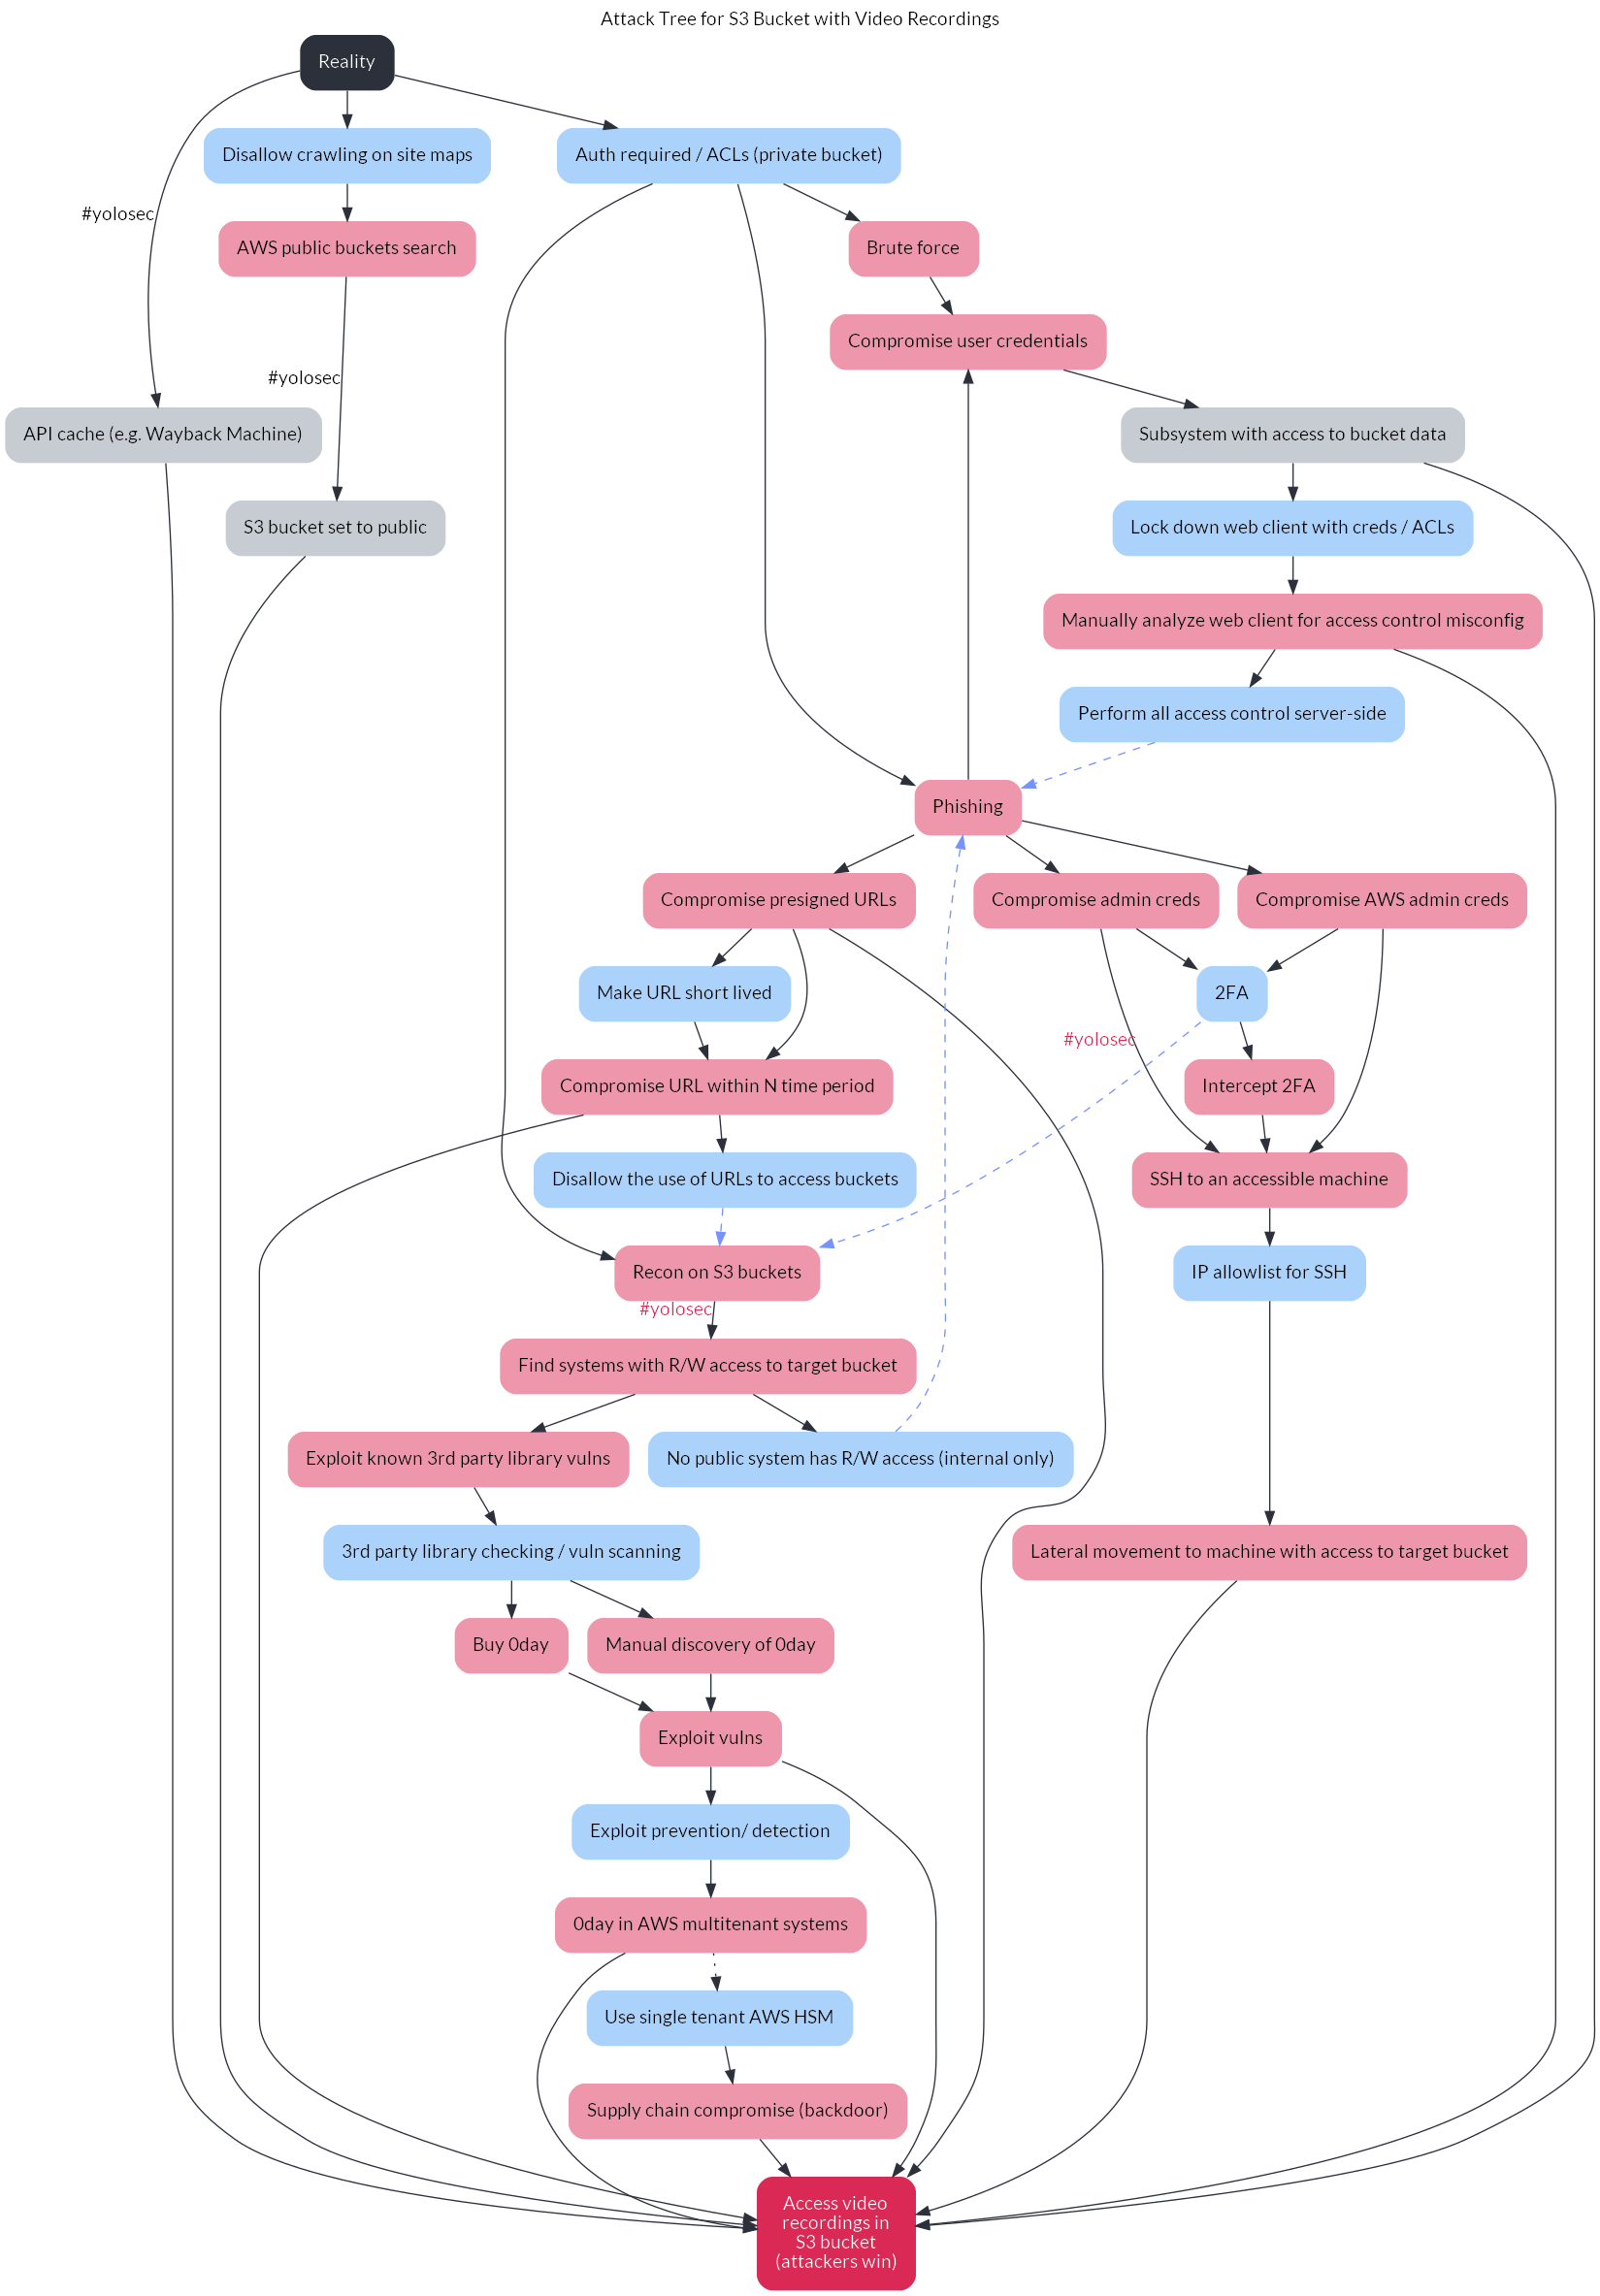 The decision tree with the base styling